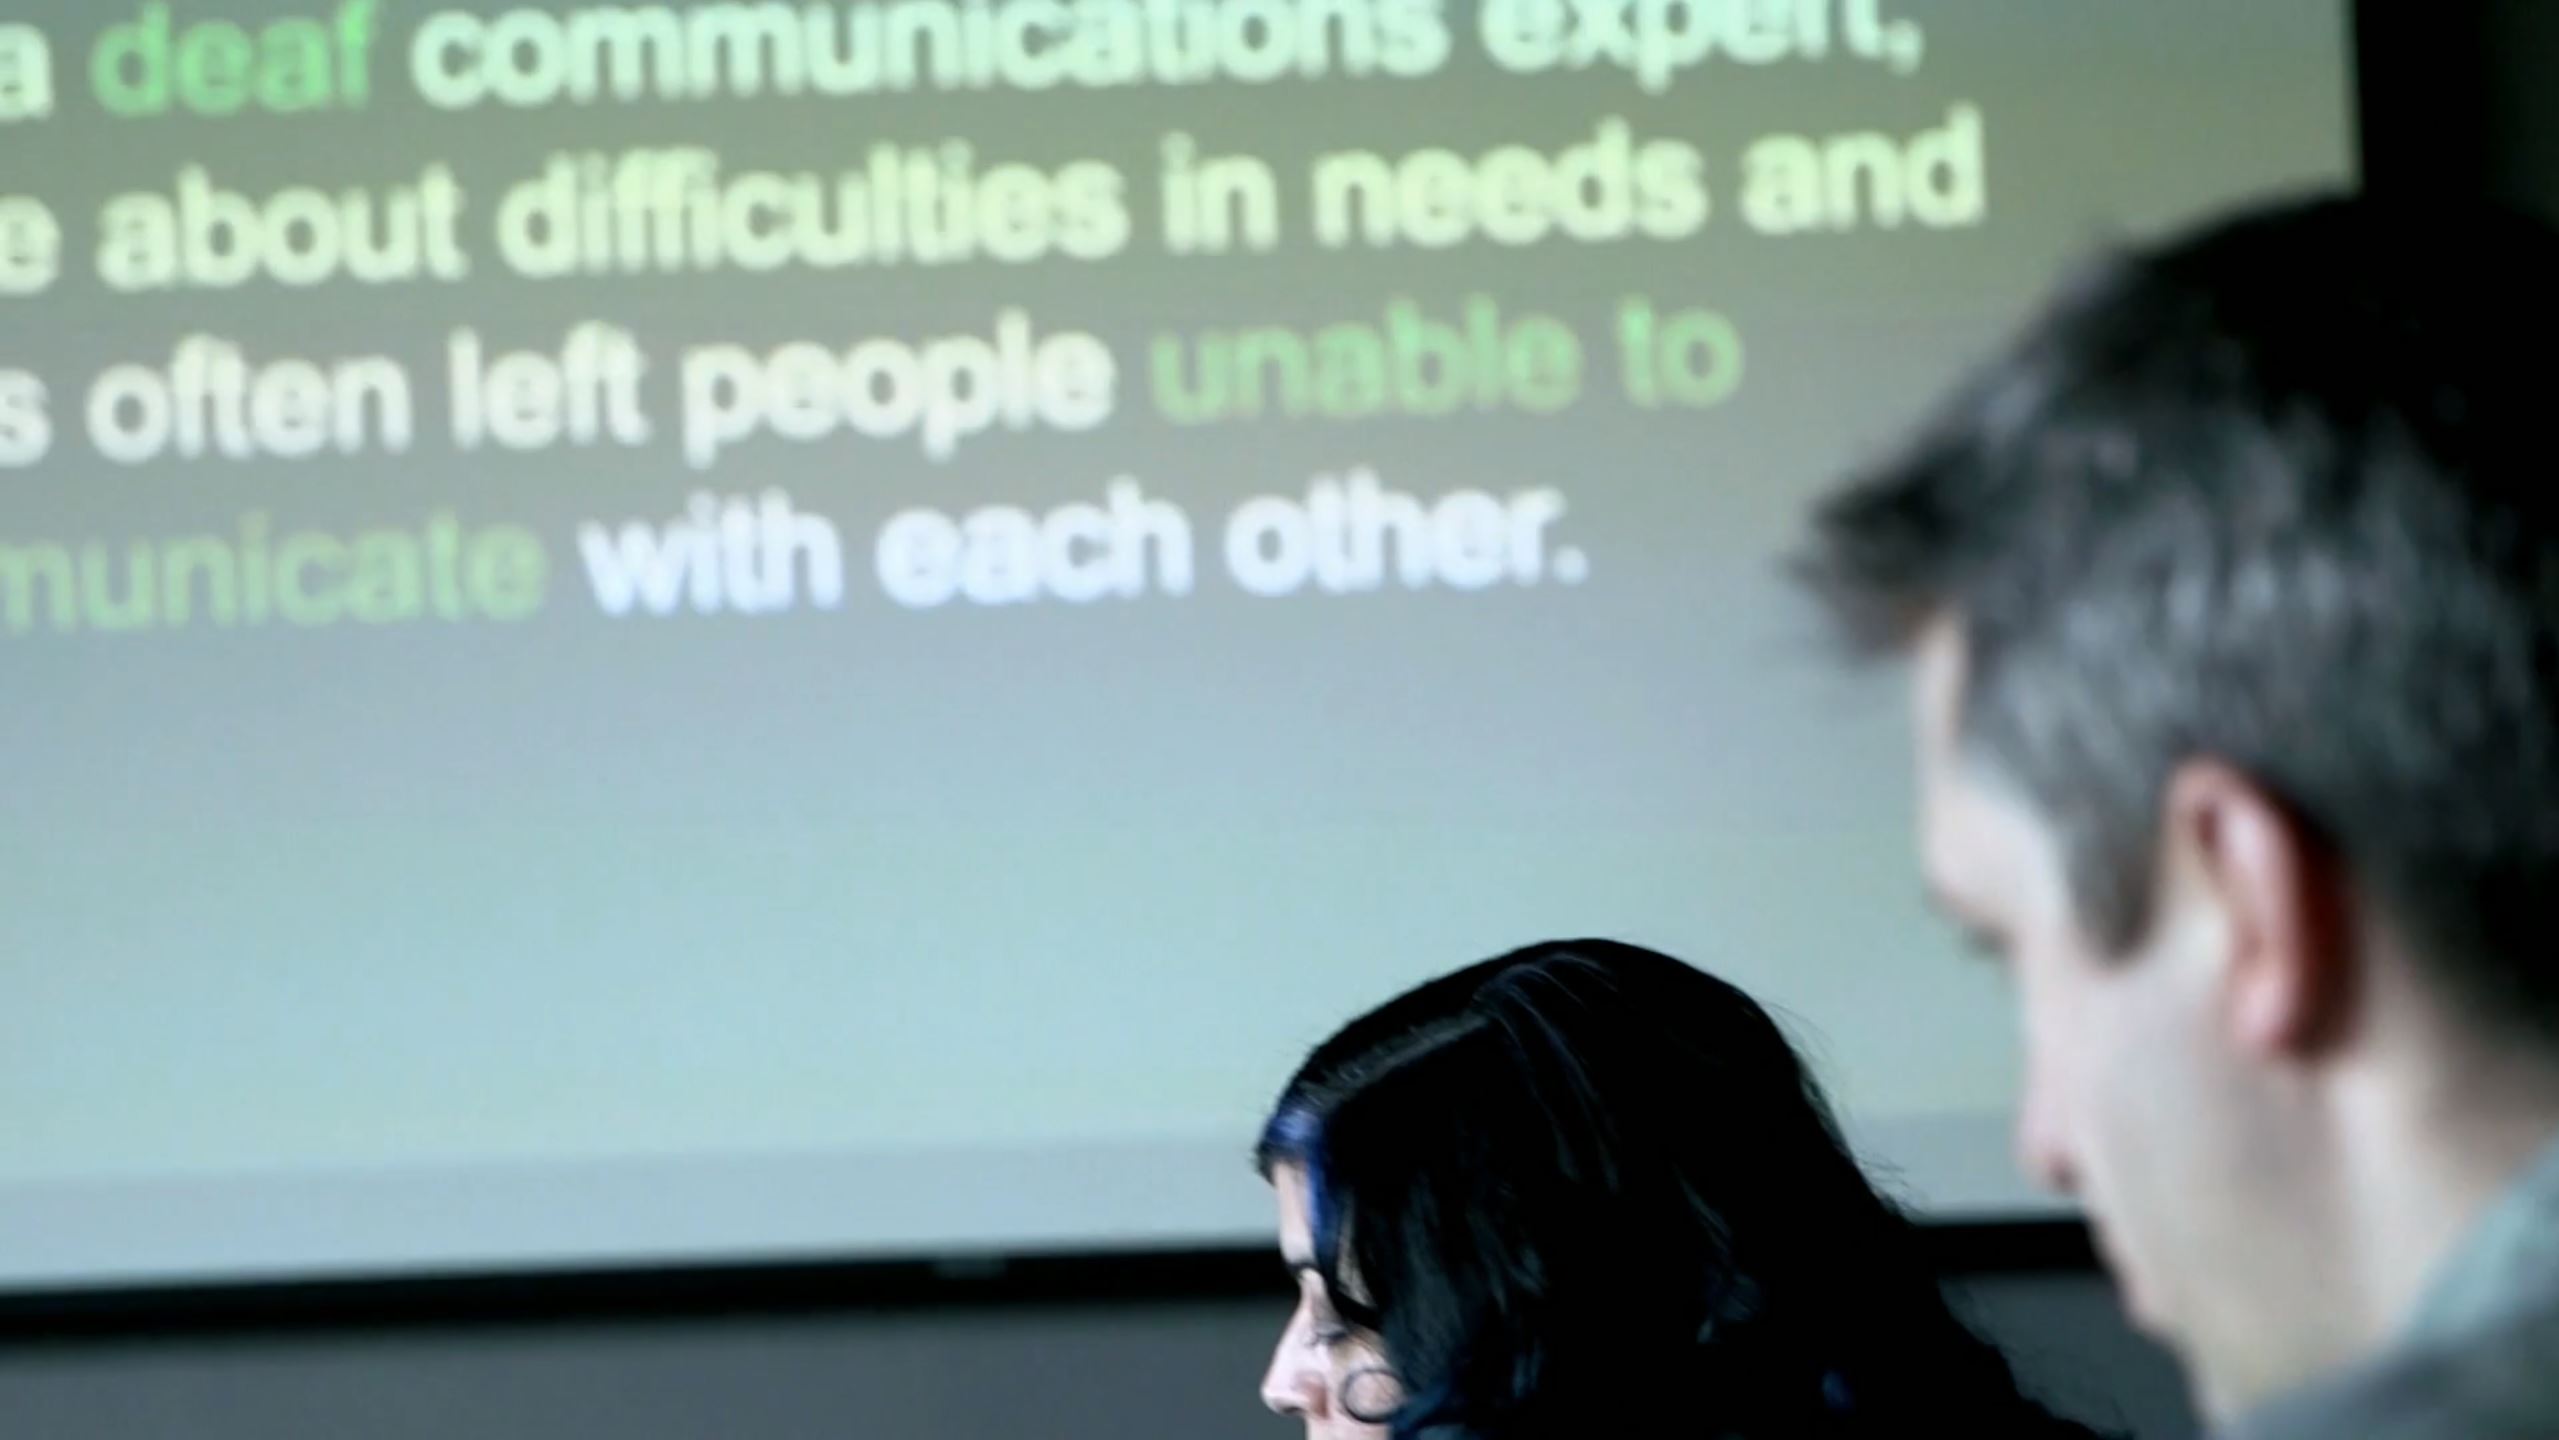 Two people watching a presentation on a projector.